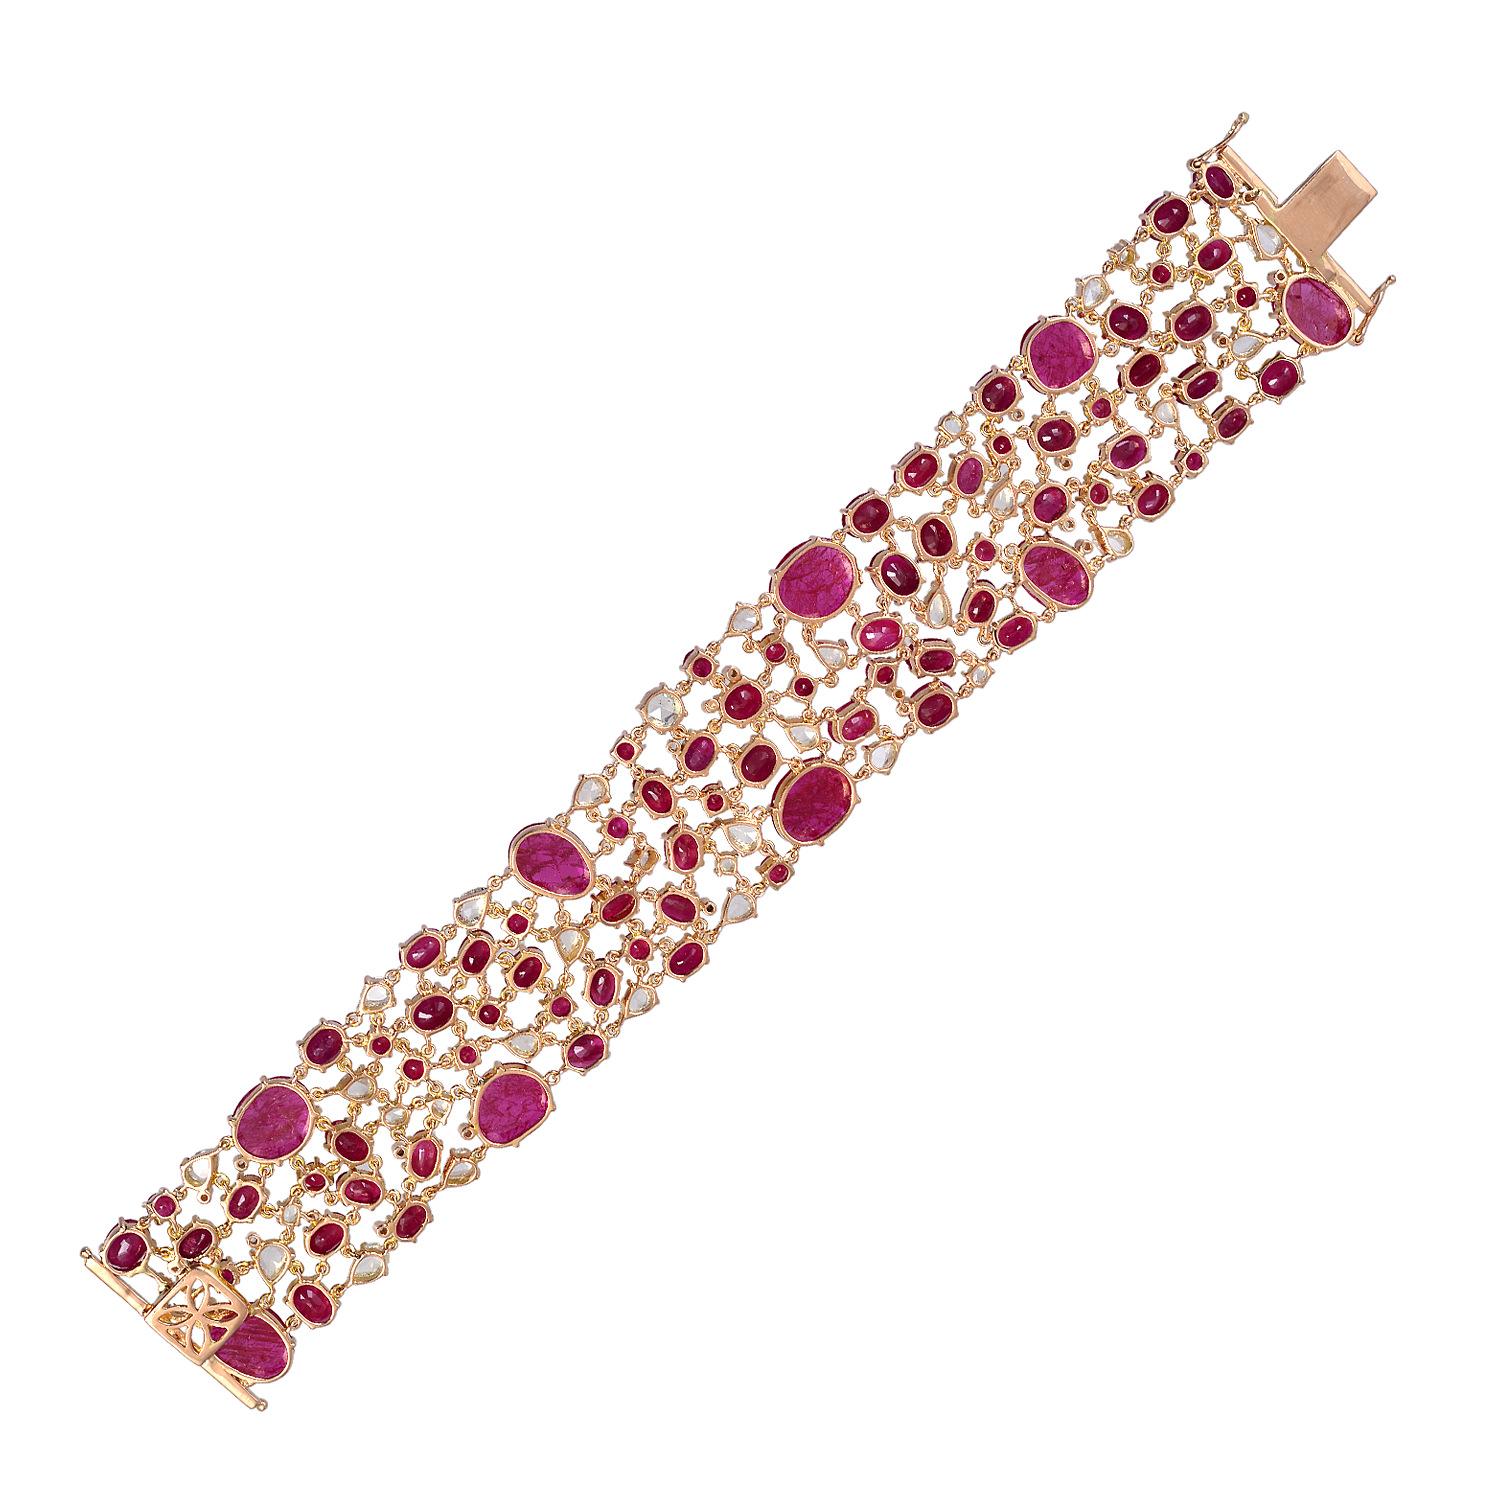 A stunning statement cuff handmade in 18K gold.  It is set in 52.82 carats ruby and 5.815 carats of sparkling diamonds. Clasp Closure

FOLLOW  MEGHNA JEWELS storefront to view the latest collection & exclusive pieces.  Meghna Jewels is proudly rated